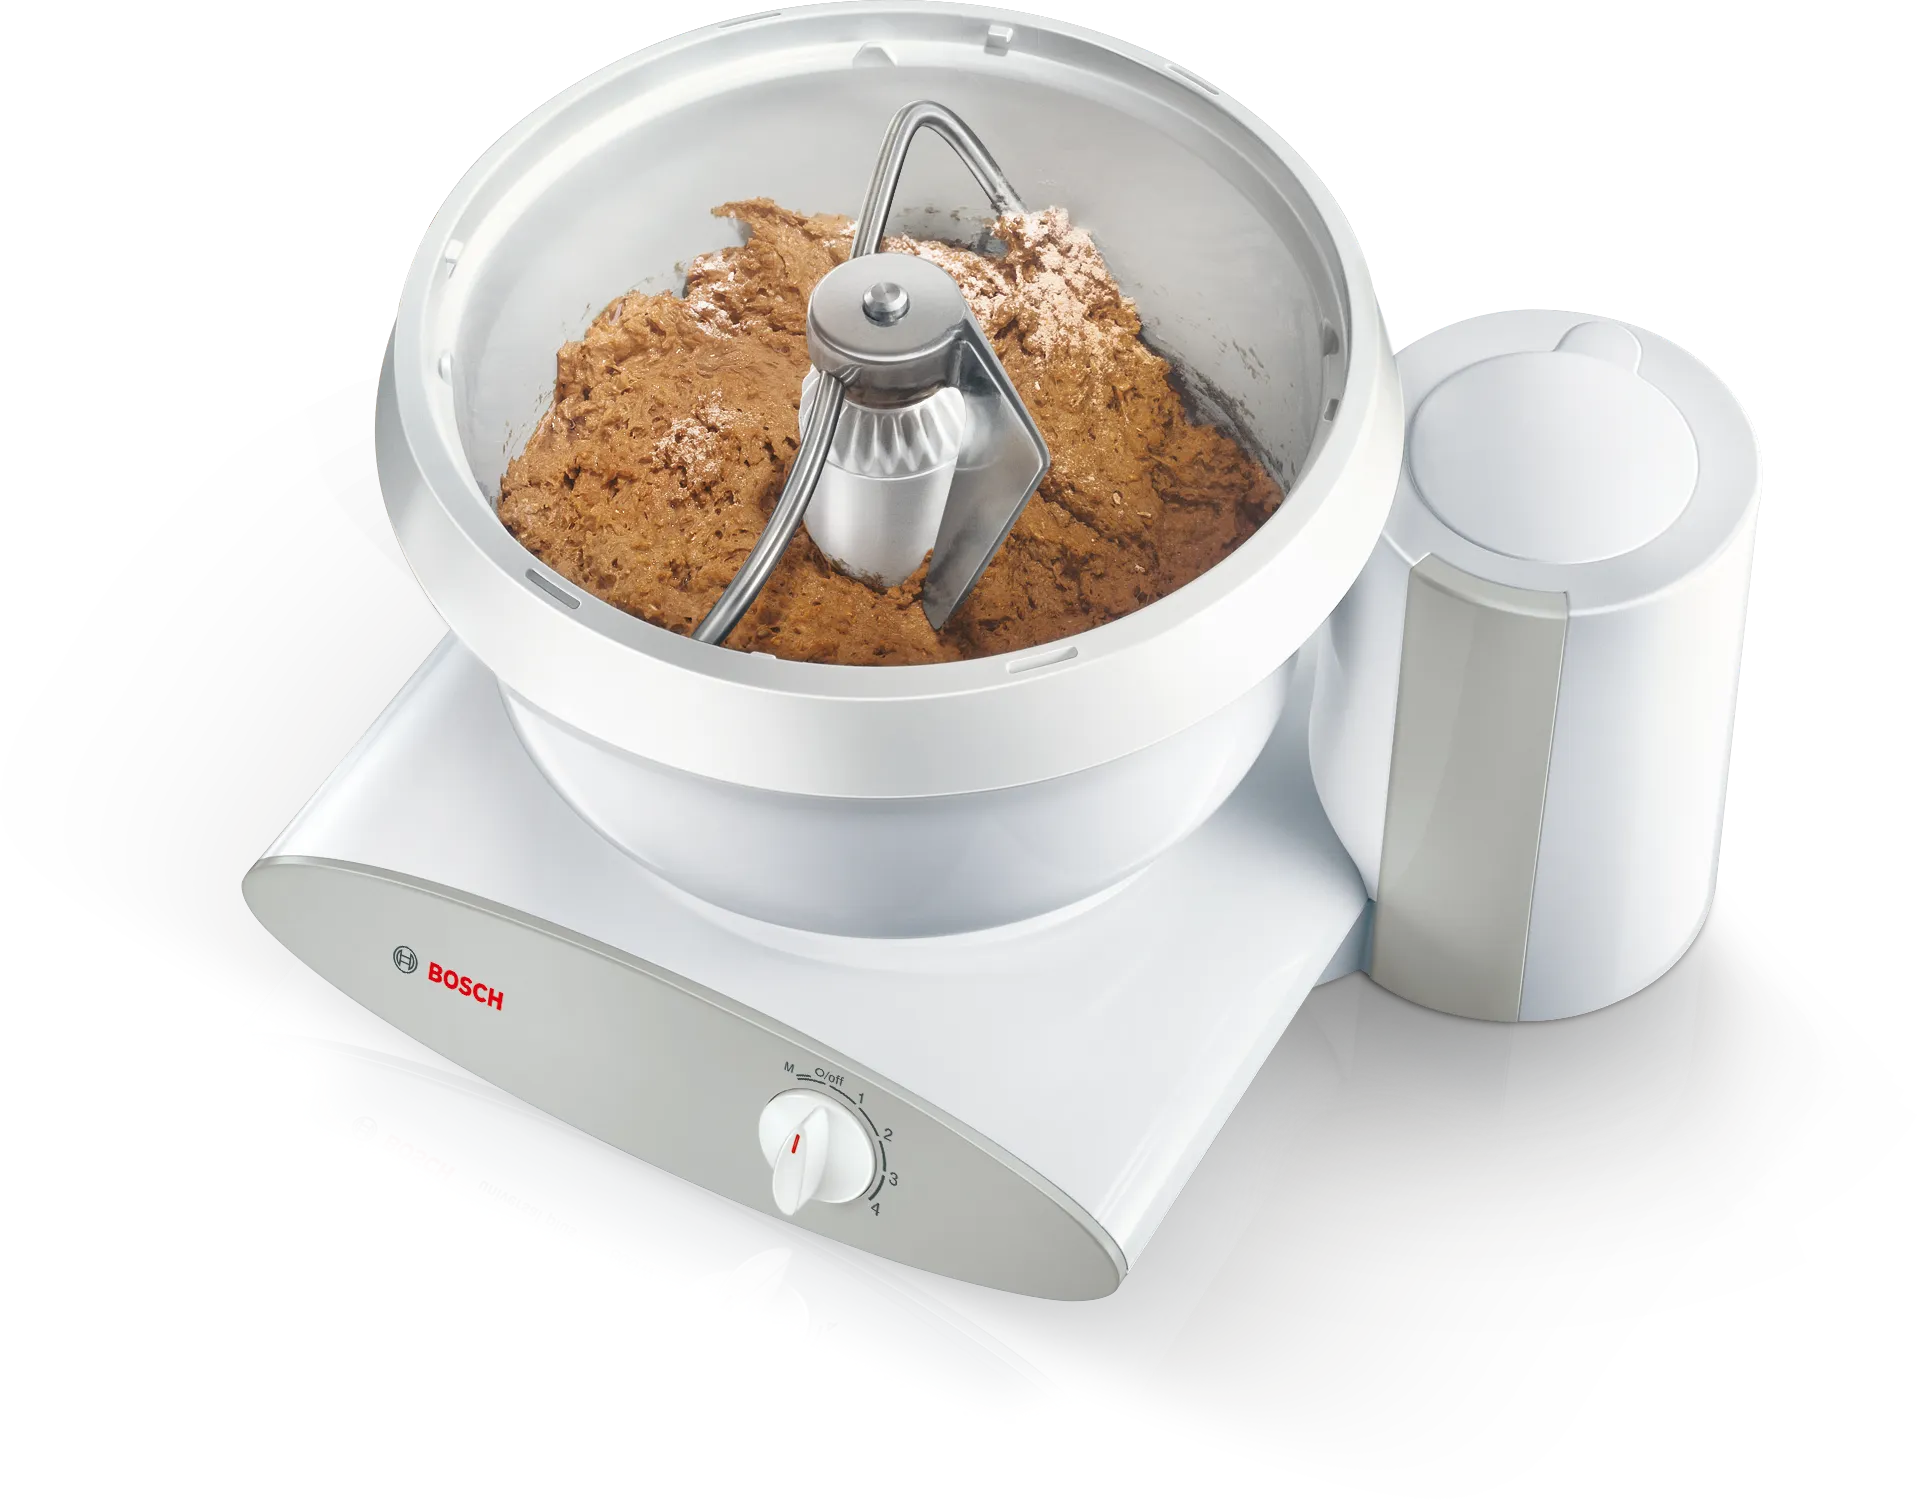 Bosch Universal Plus Mixer with Cookie Paddles & Bowl Scraper Reviews 2023